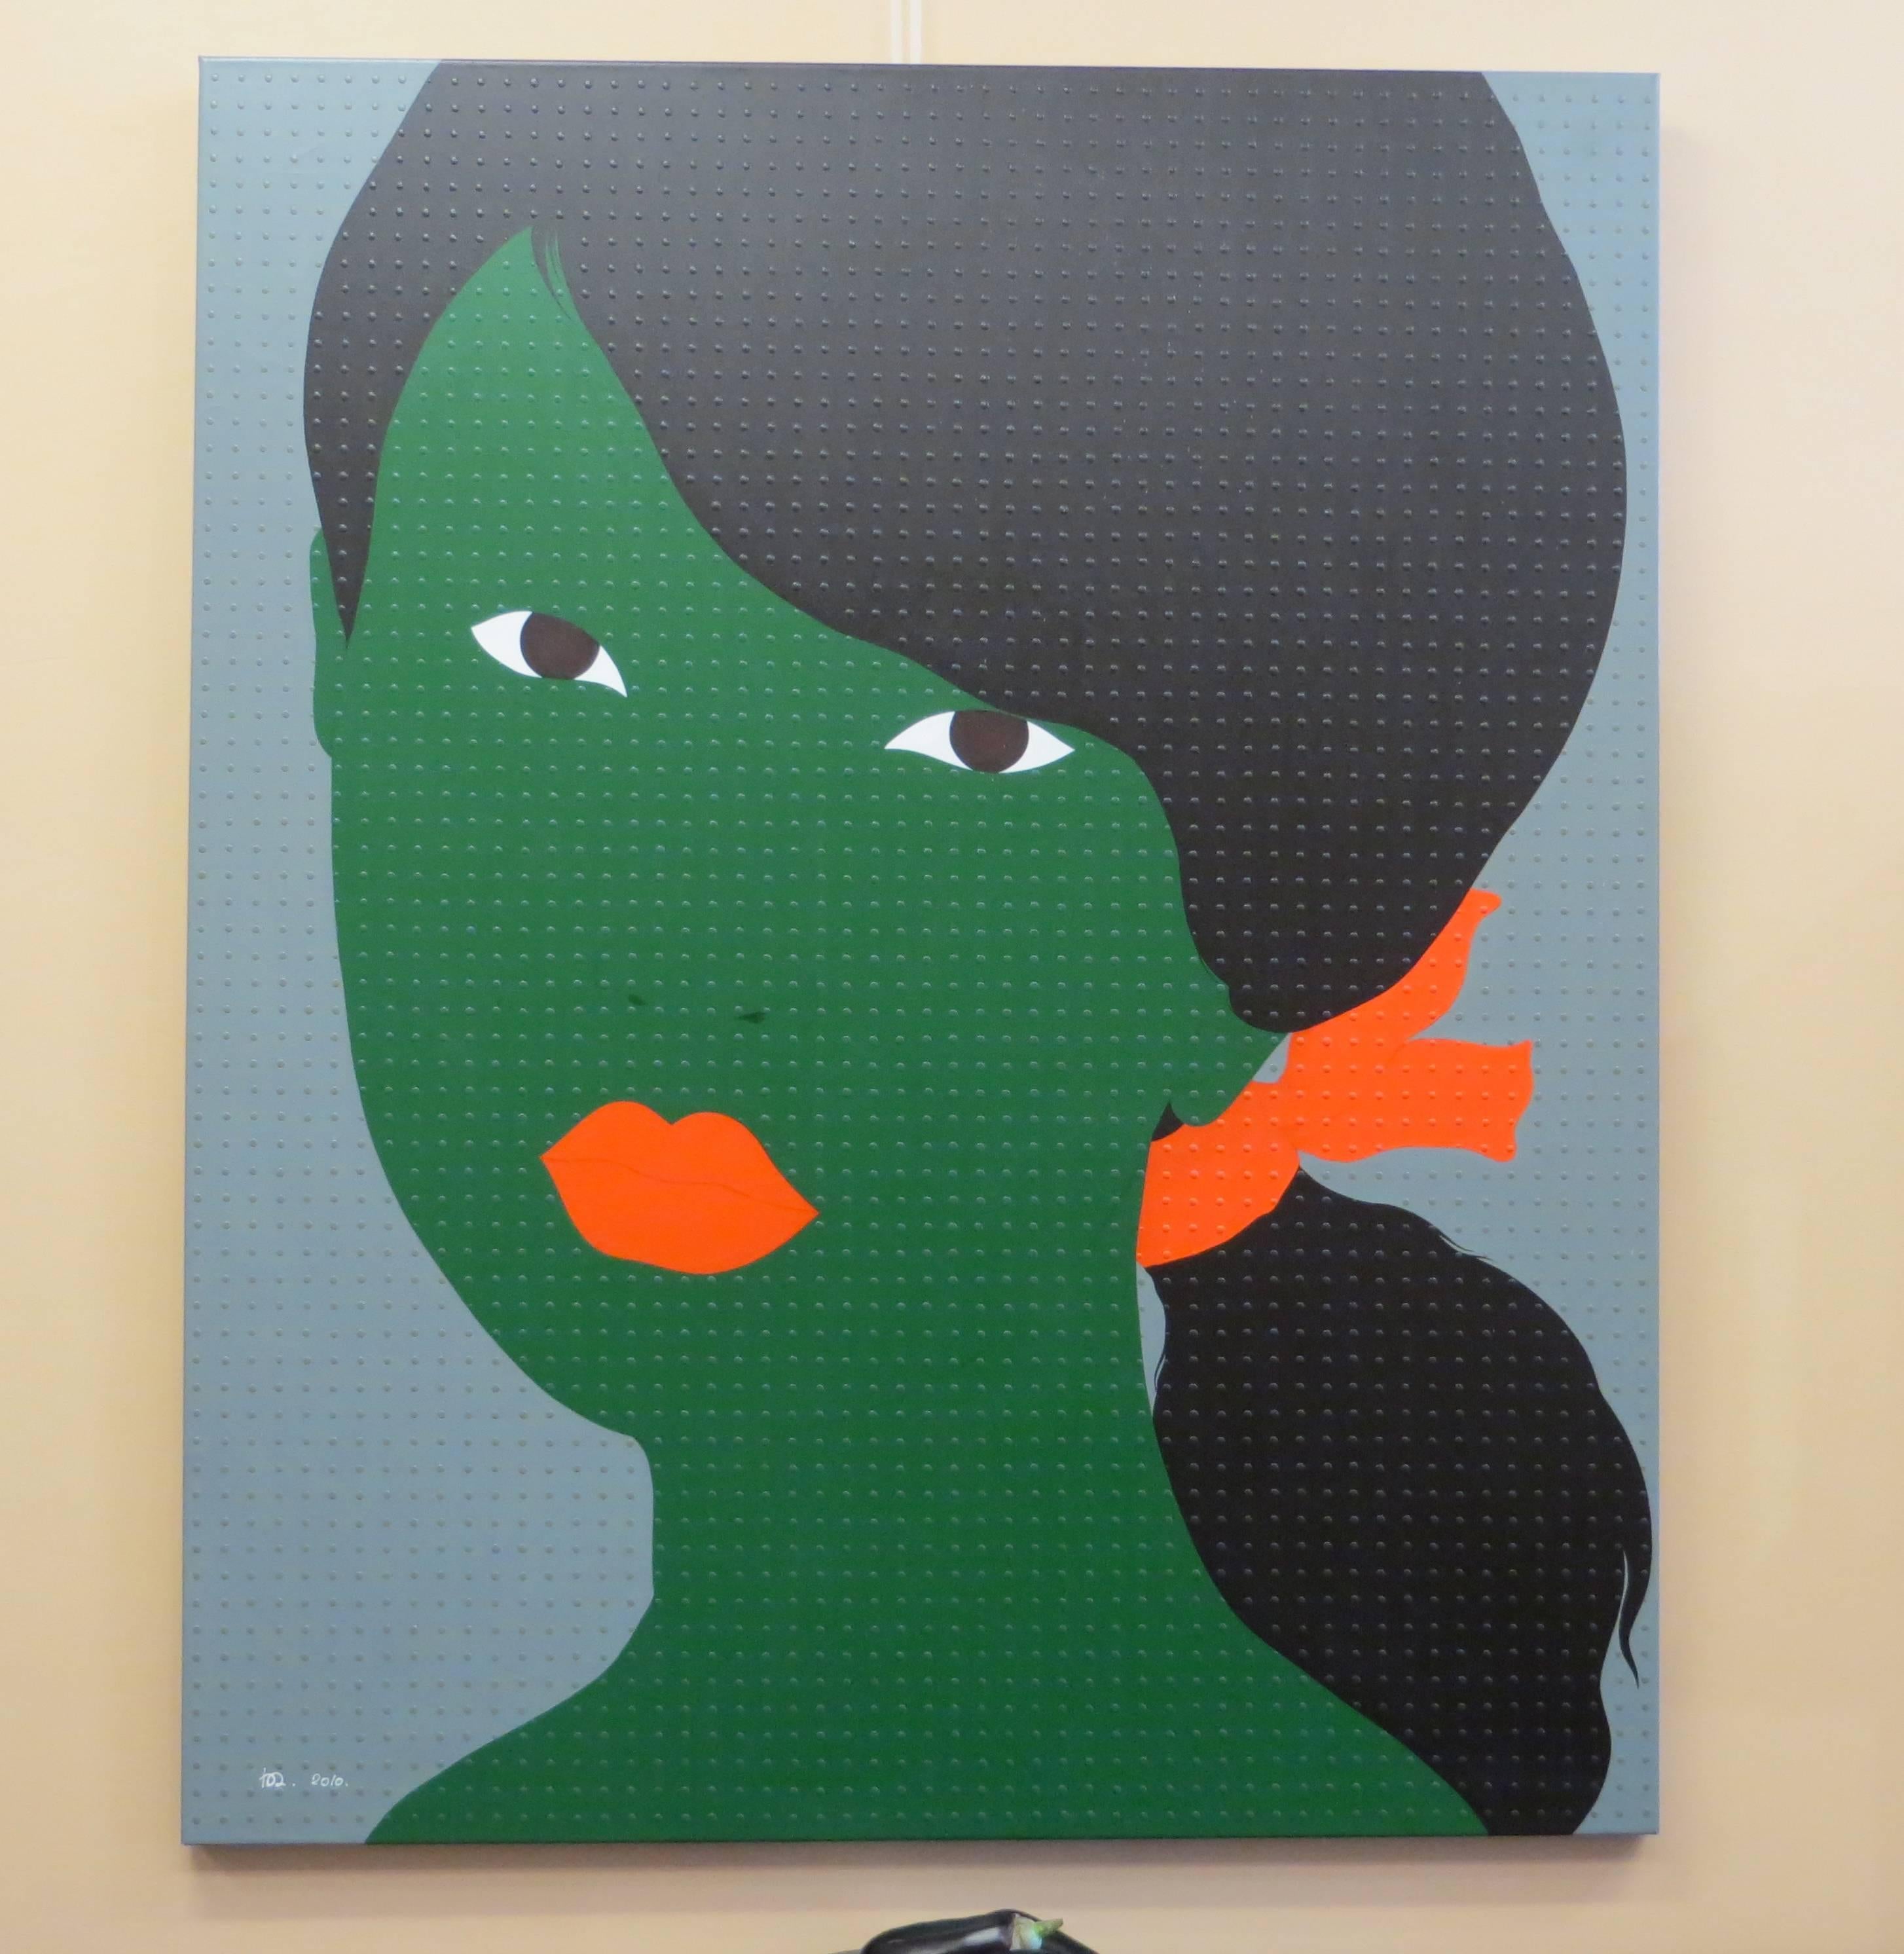 An unusual contemporary acrylic painting of a female face on dotted canvas - AA1914
Thailand, 2010

Measures: 169 cm x 140 cm.